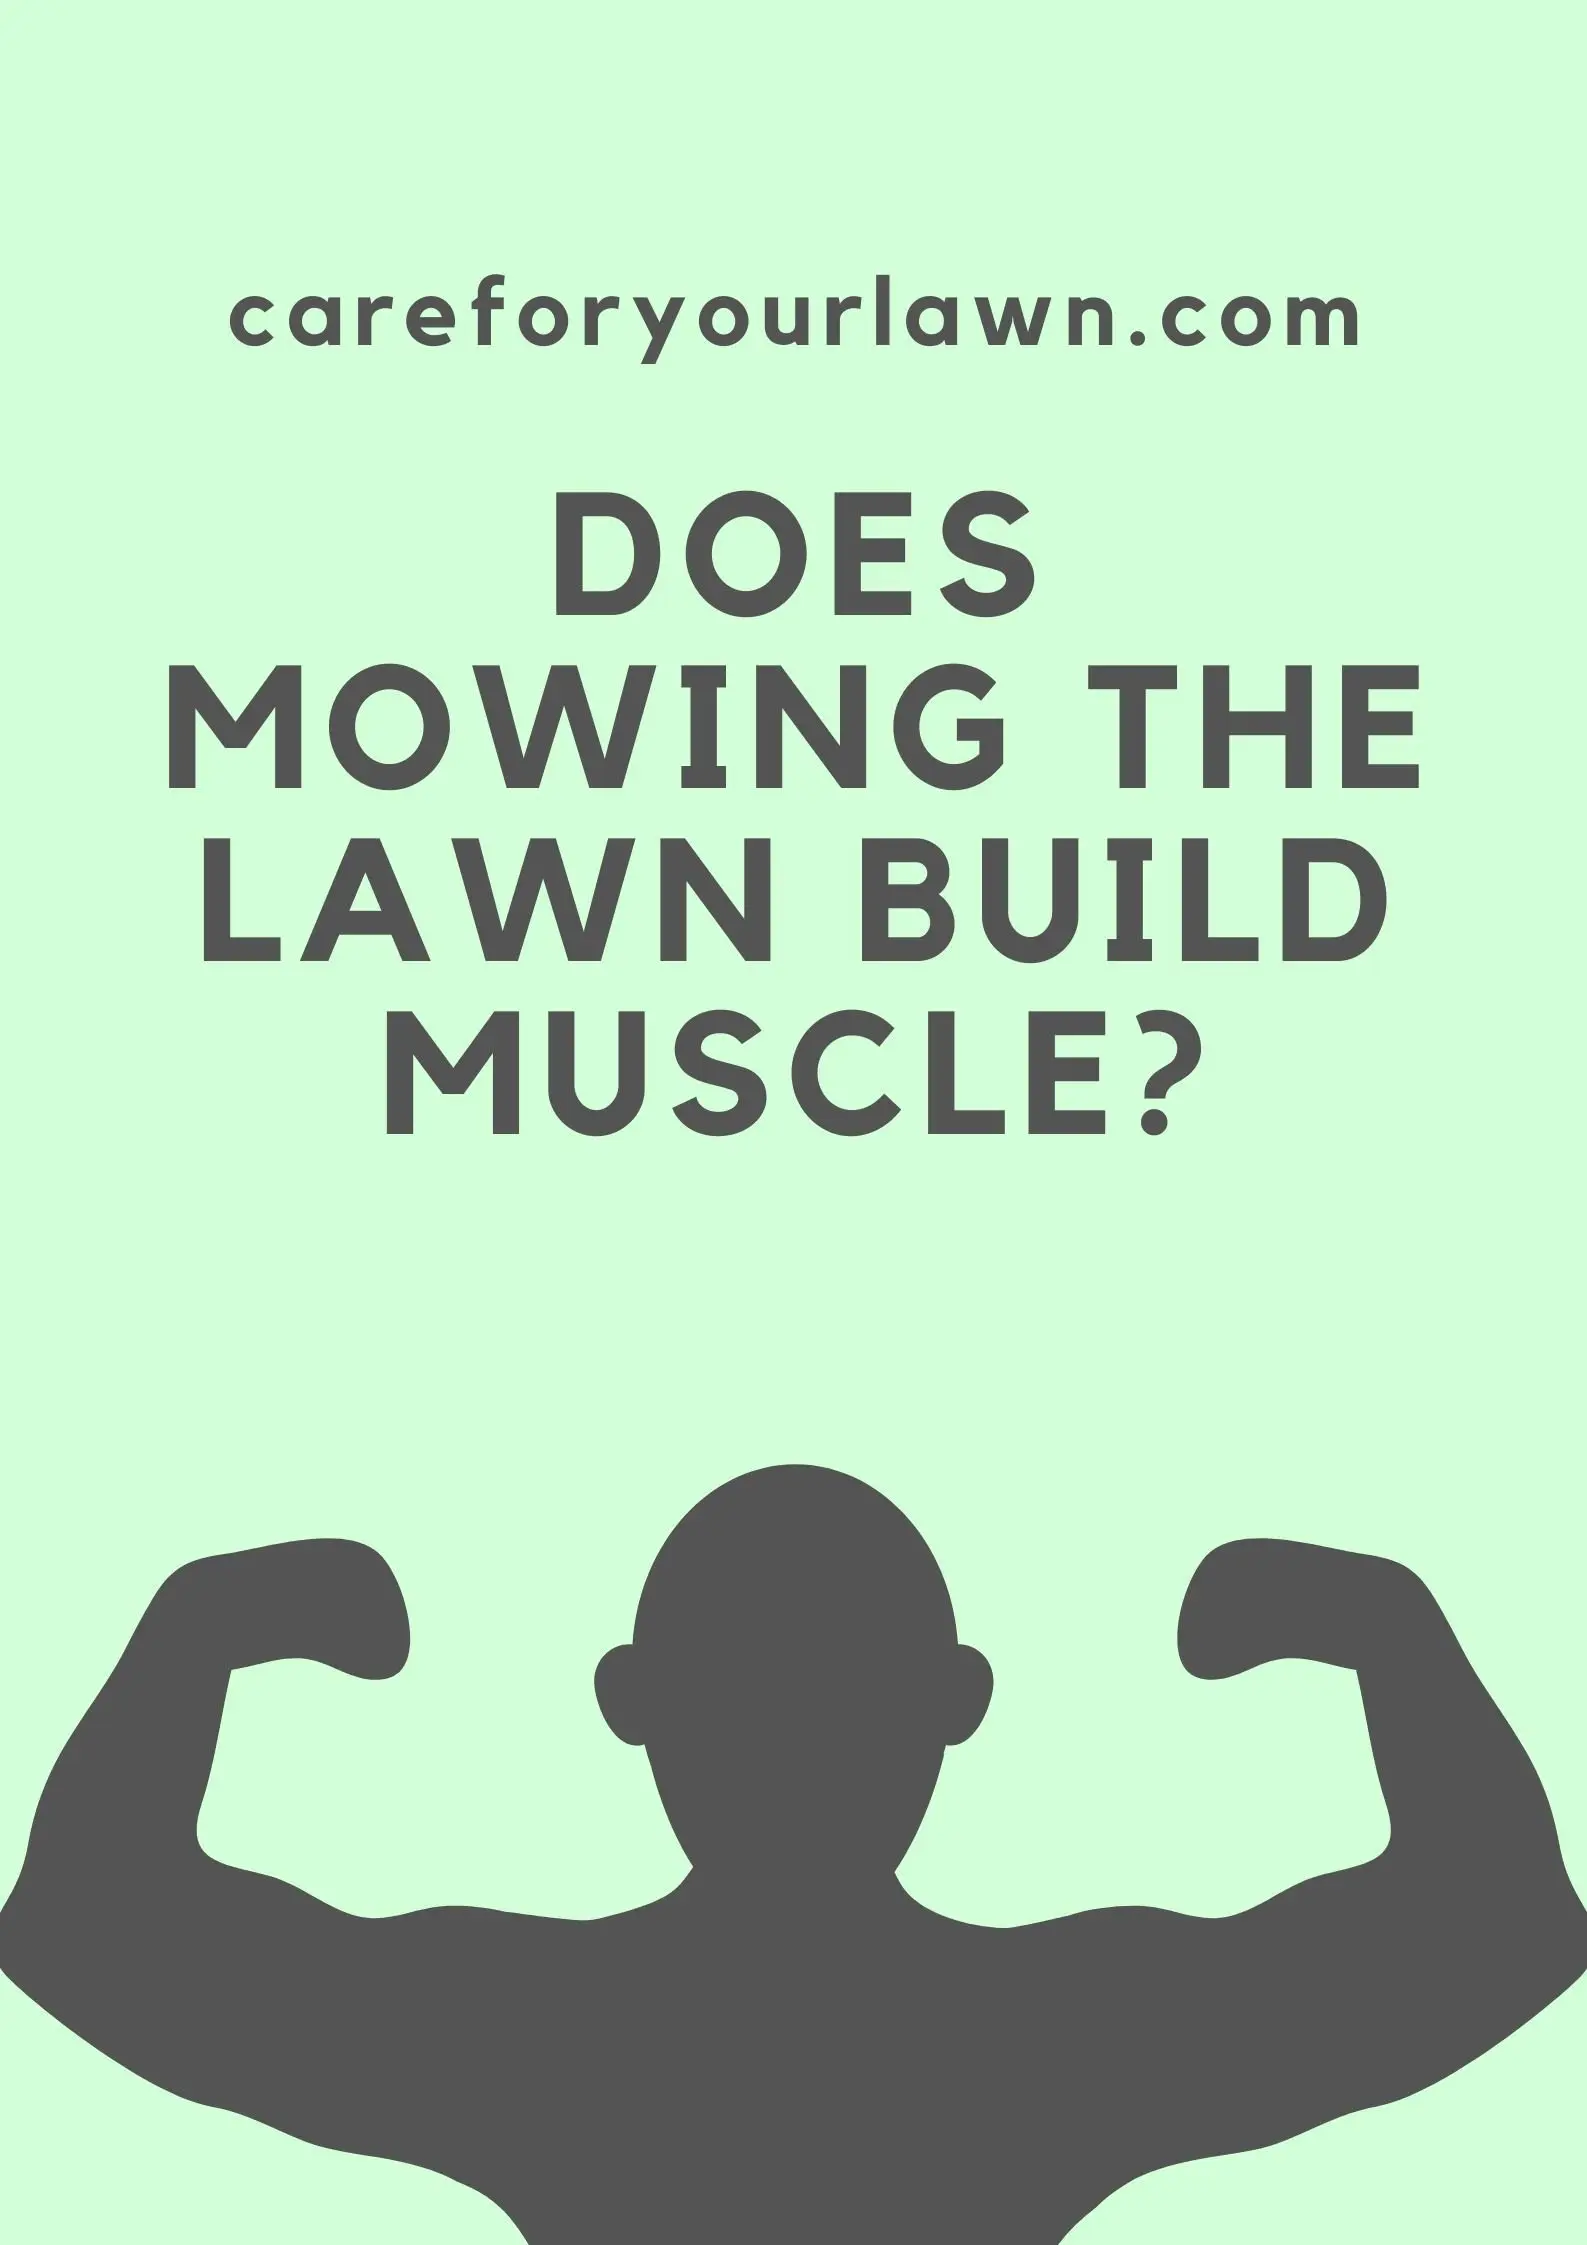 does mowing the lawn build muscle?